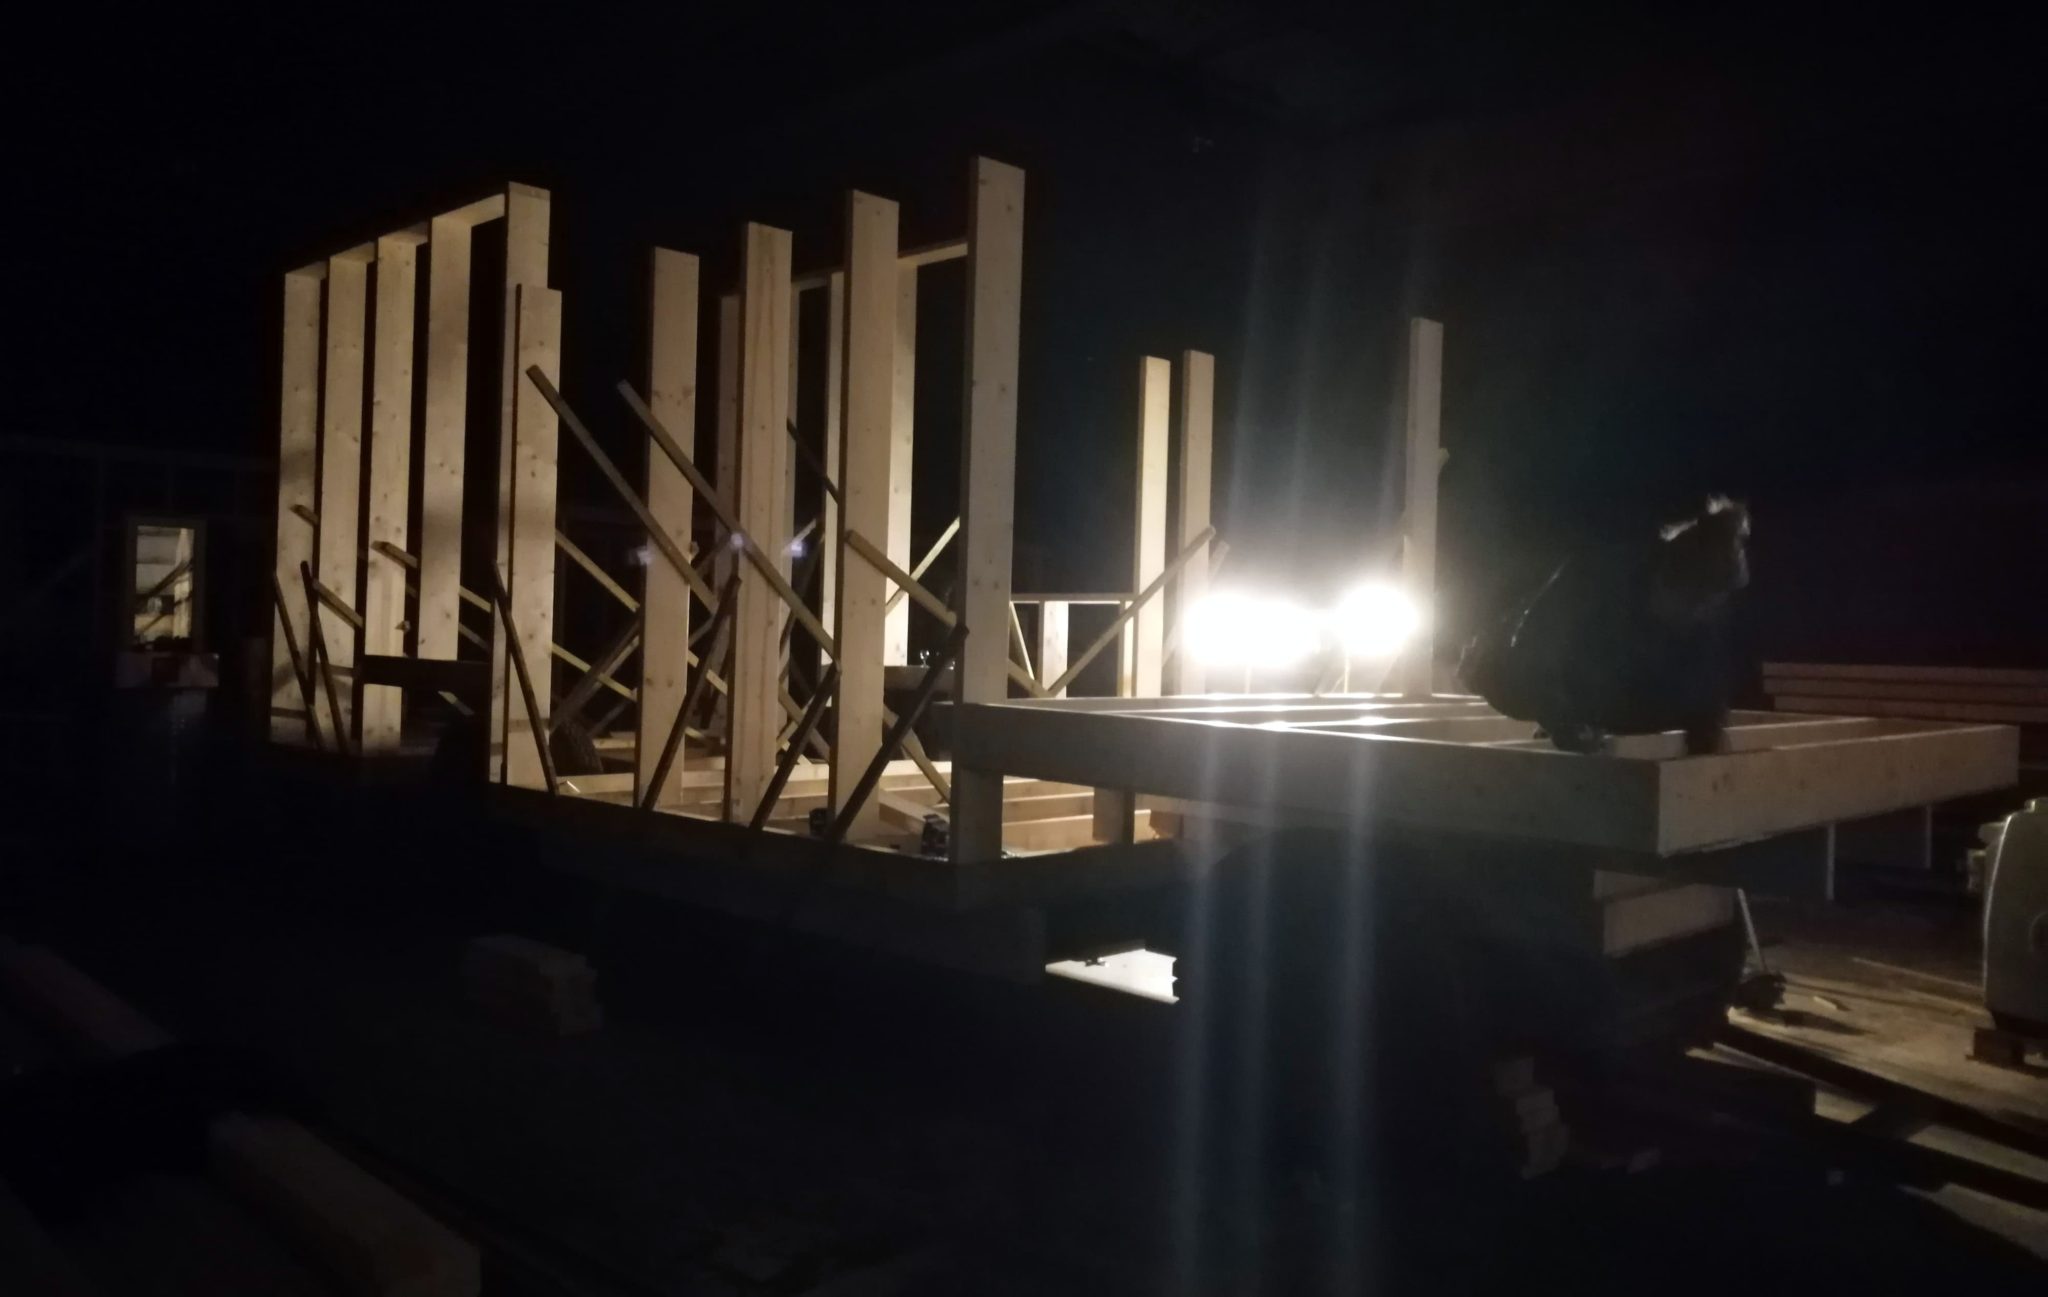 Working on tiny house in the dark